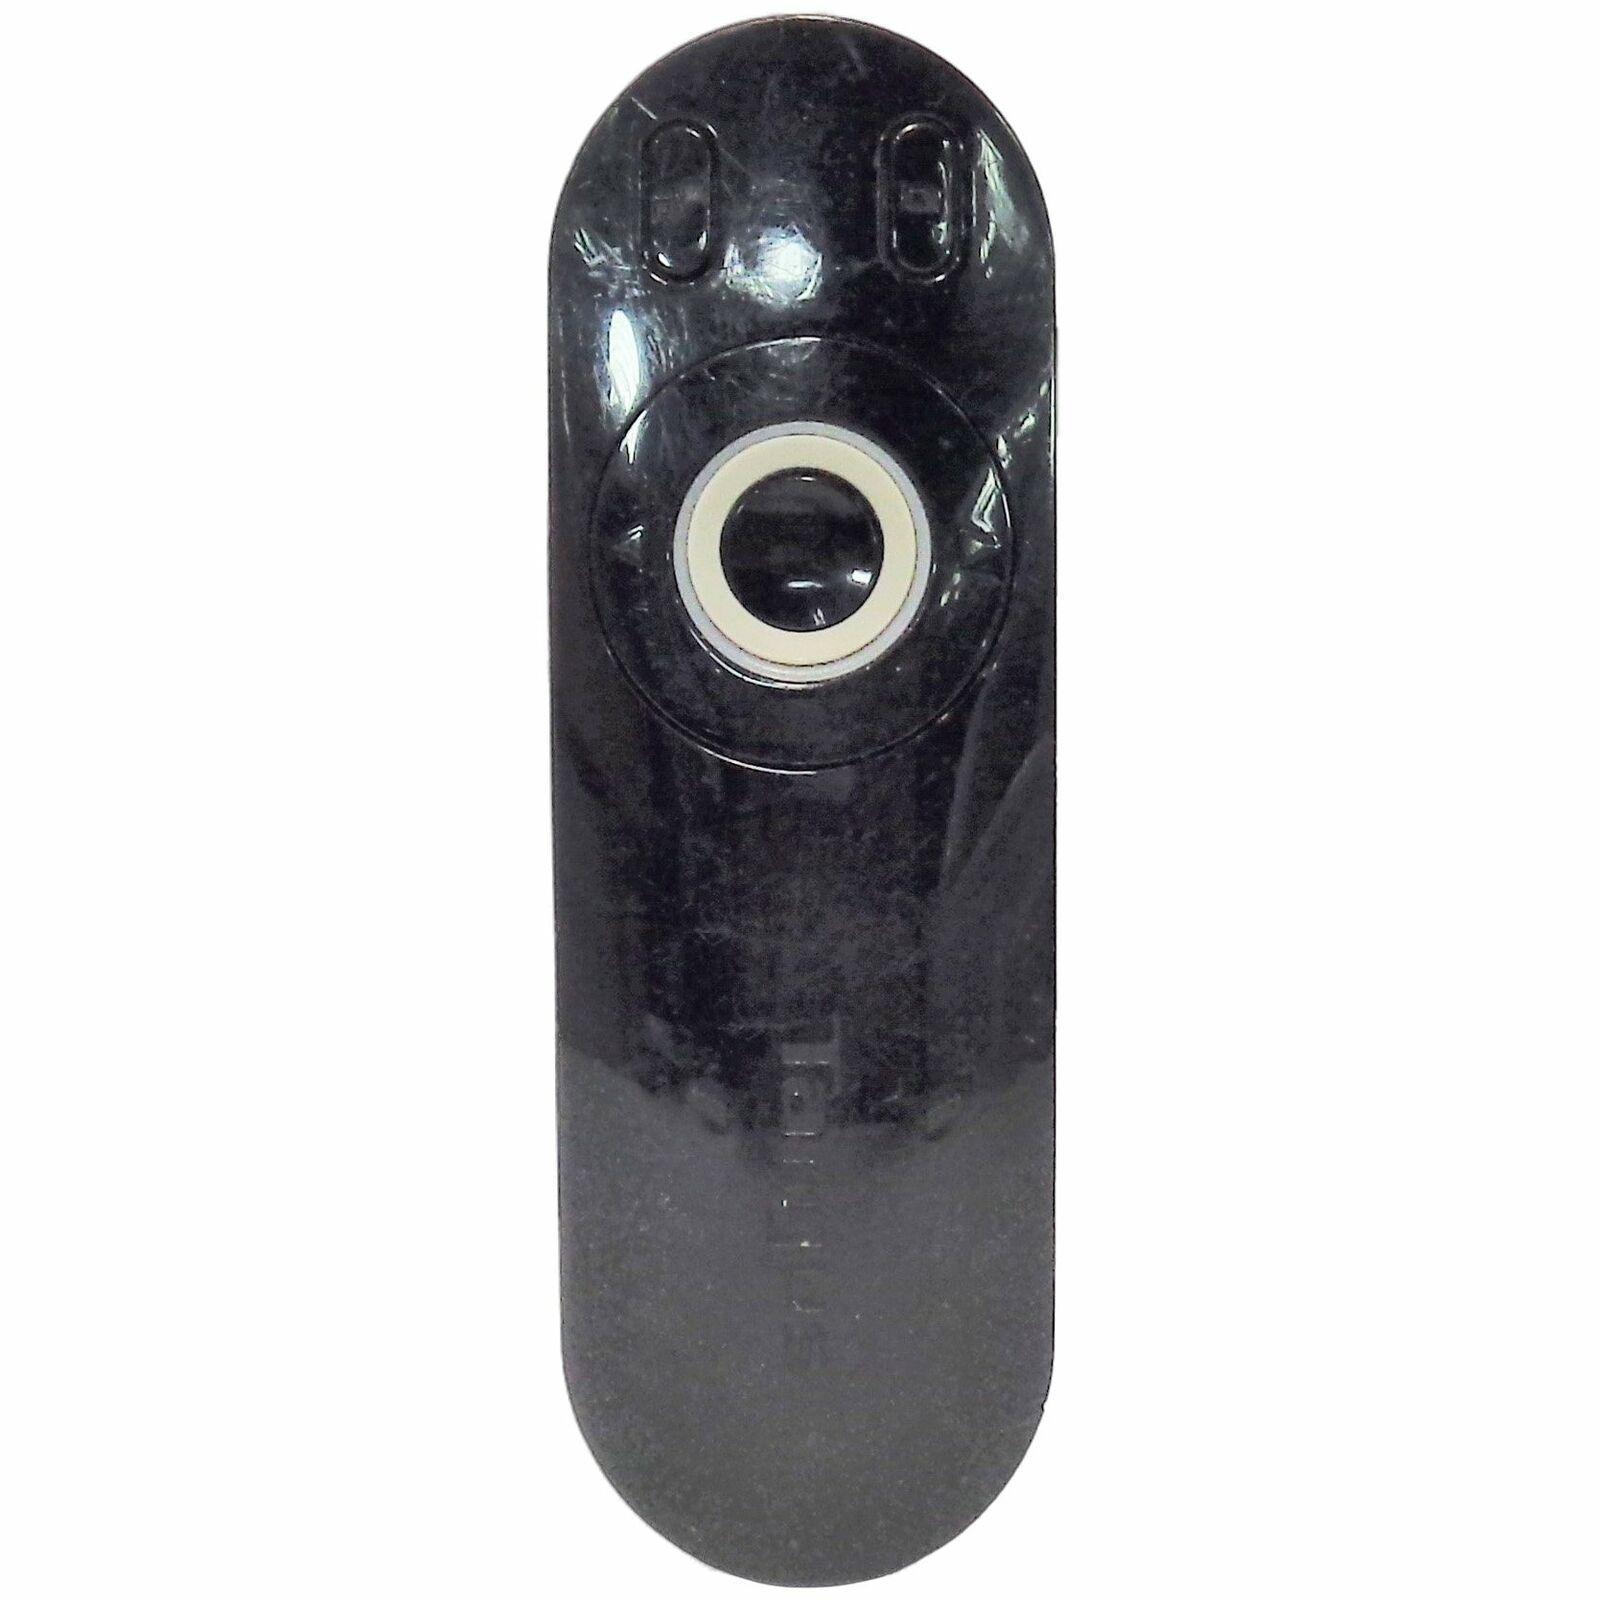 Primary image for Targus AMP13US Laser Presentation Remote Control, Remote ONLY